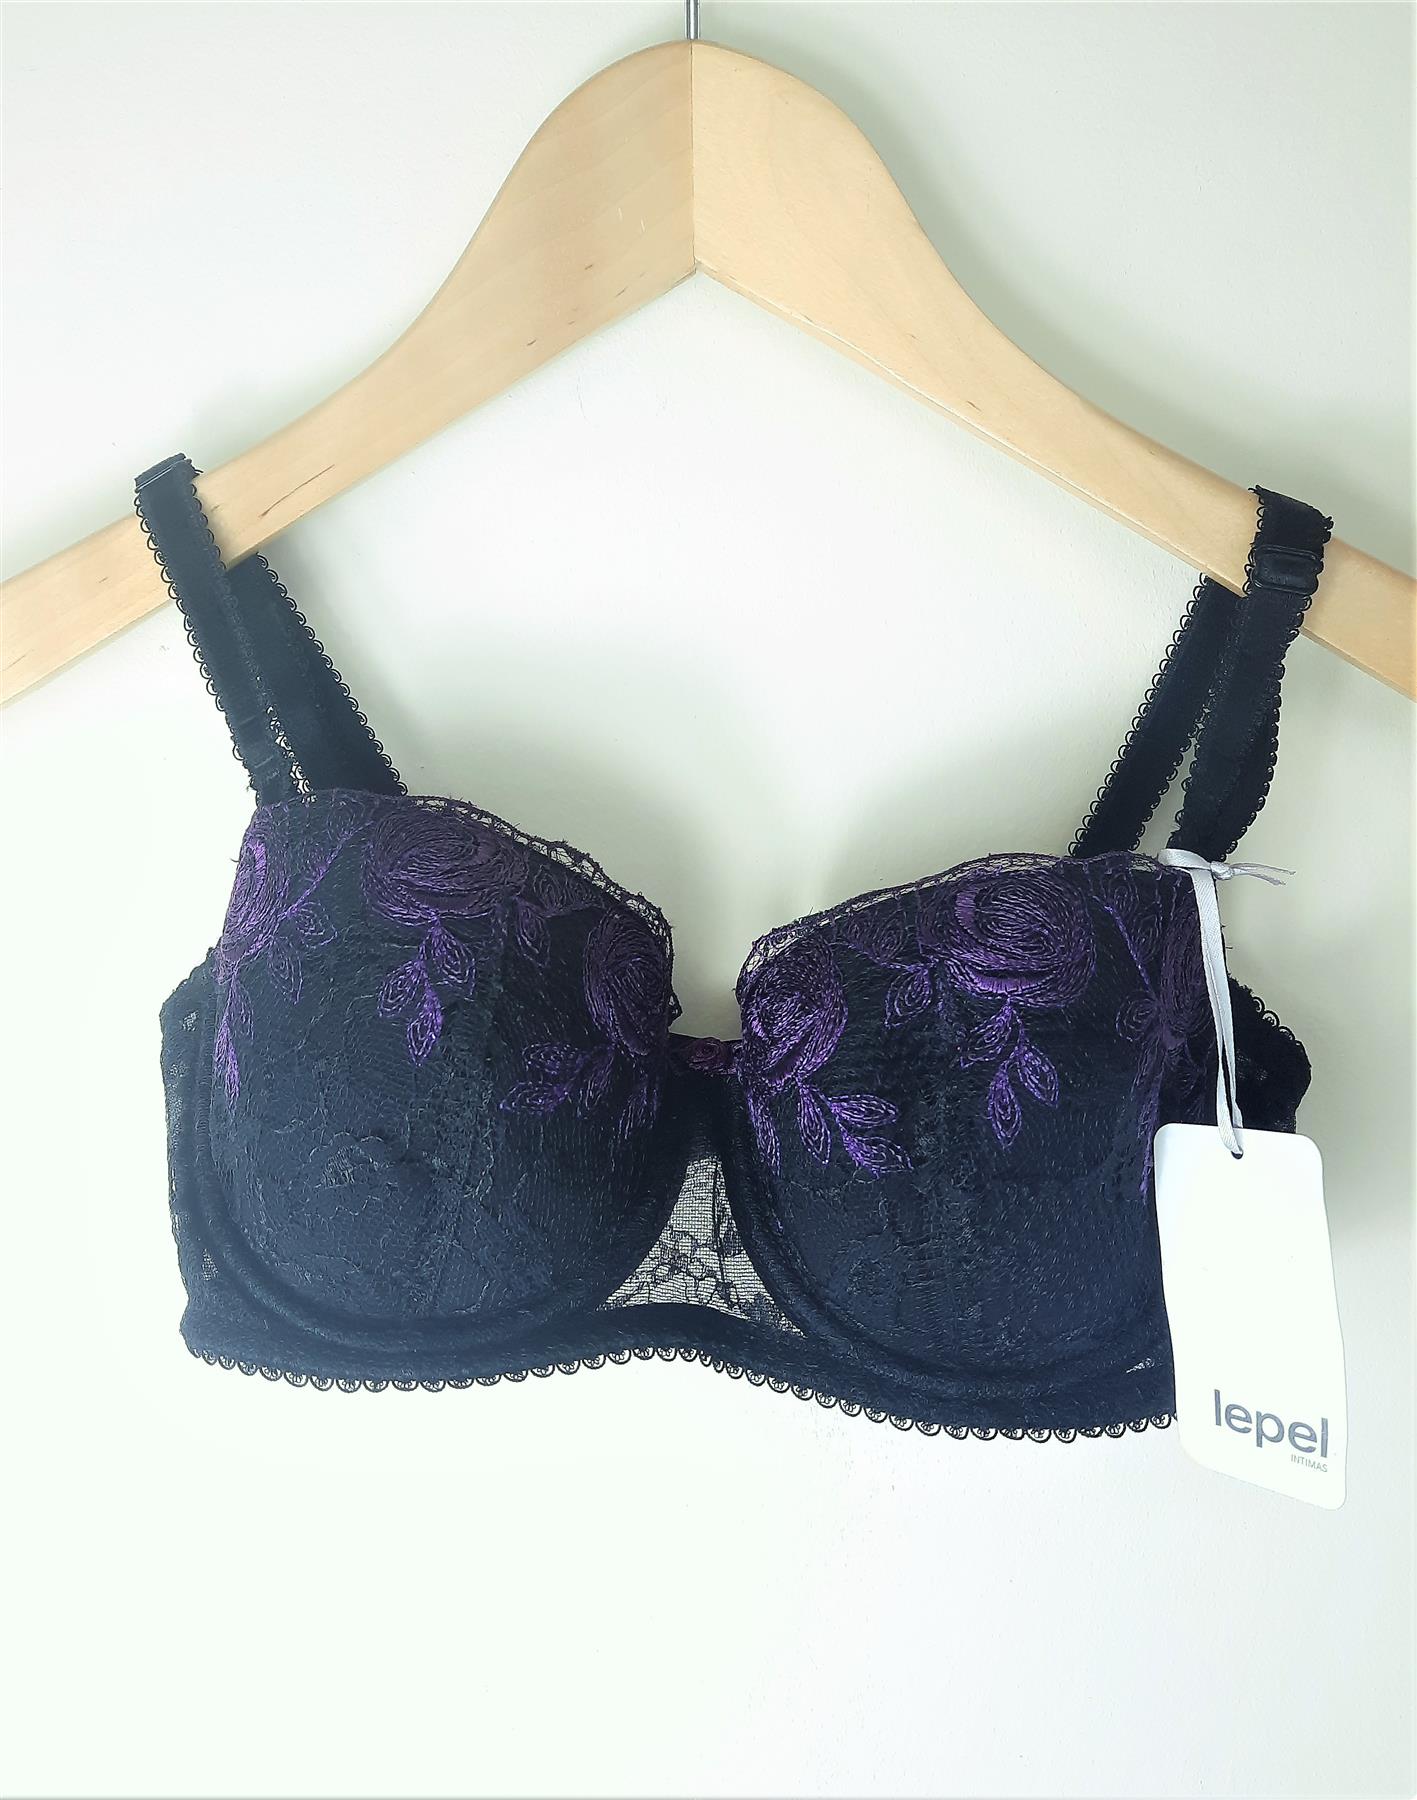 30C Bra Underwired Multiway Padded Strapless Embroidered Lepel Balcony Black New